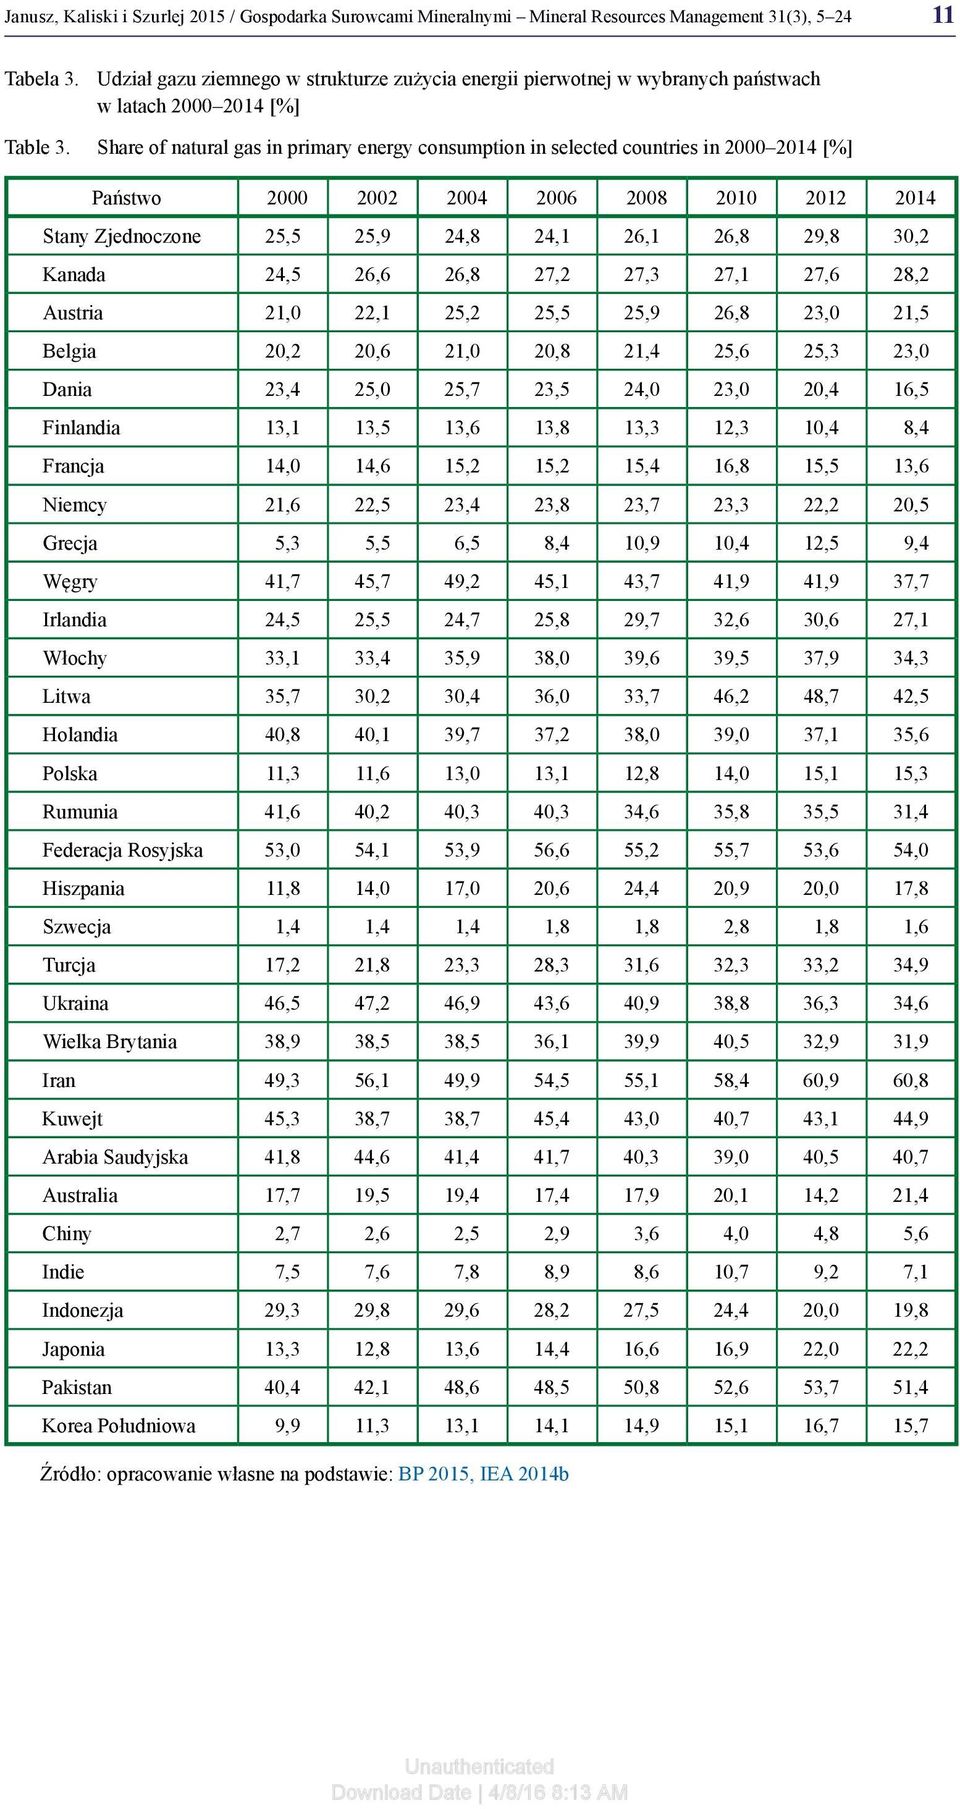 Share of natural gas in primary energy consumption in selected countries in 2000 2014 [%] Państwo 2000 2002 2004 2006 2008 2010 2012 2014 Stany Zjednoczone 25,5 25,9 24,8 24,1 26,1 26,8 29,8 30,2